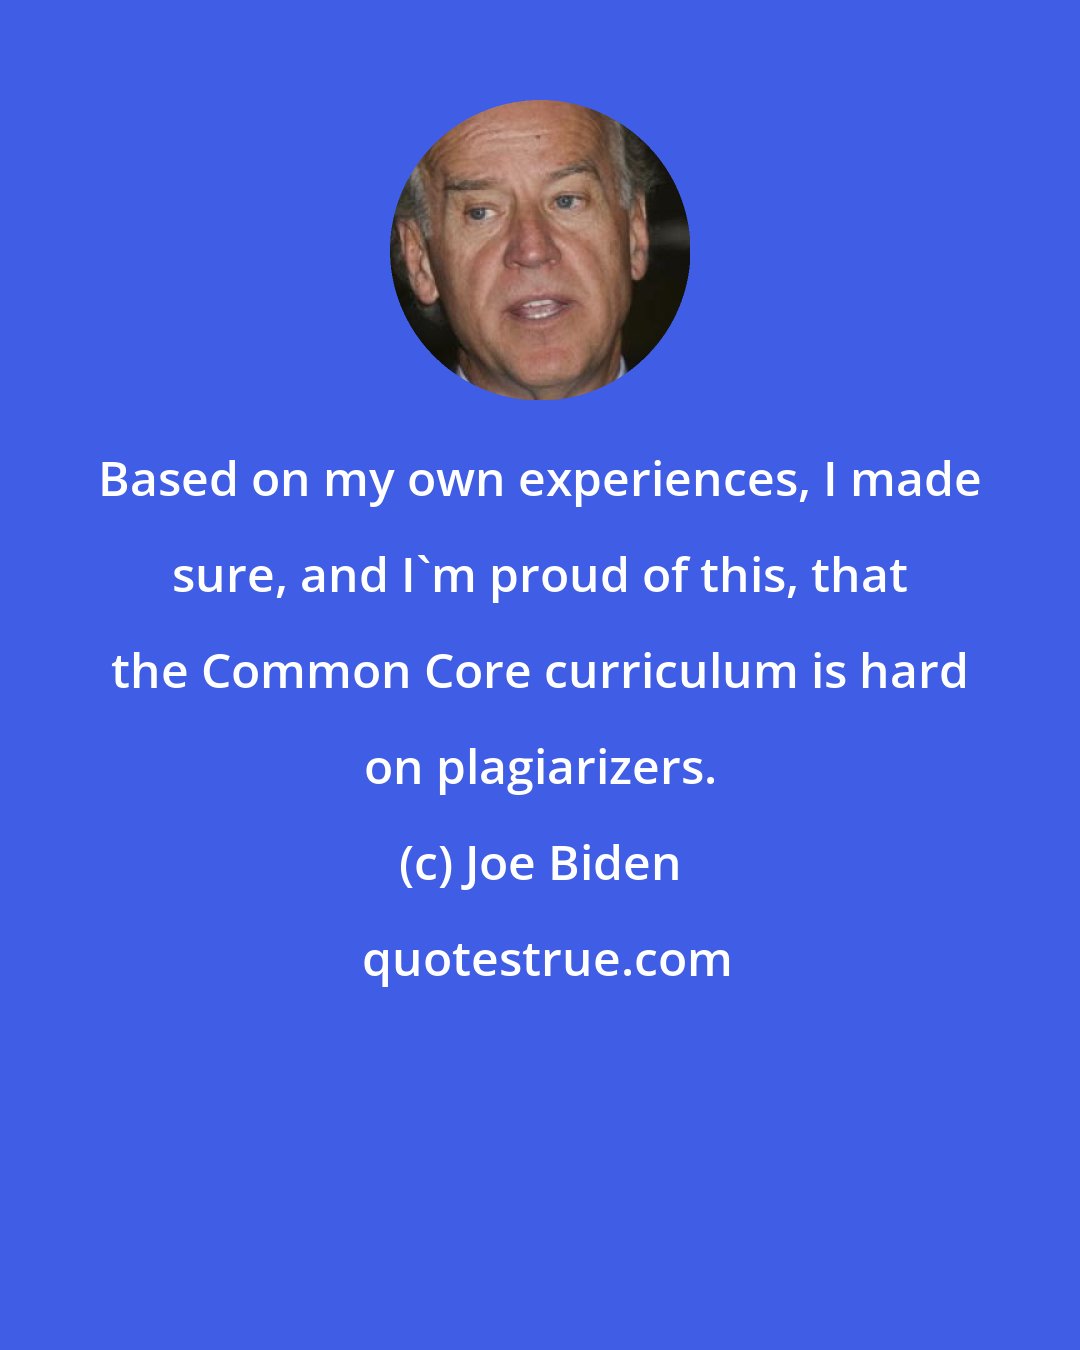 Joe Biden: Based on my own experiences, I made sure, and I'm proud of this, that the Common Core curriculum is hard on plagiarizers.